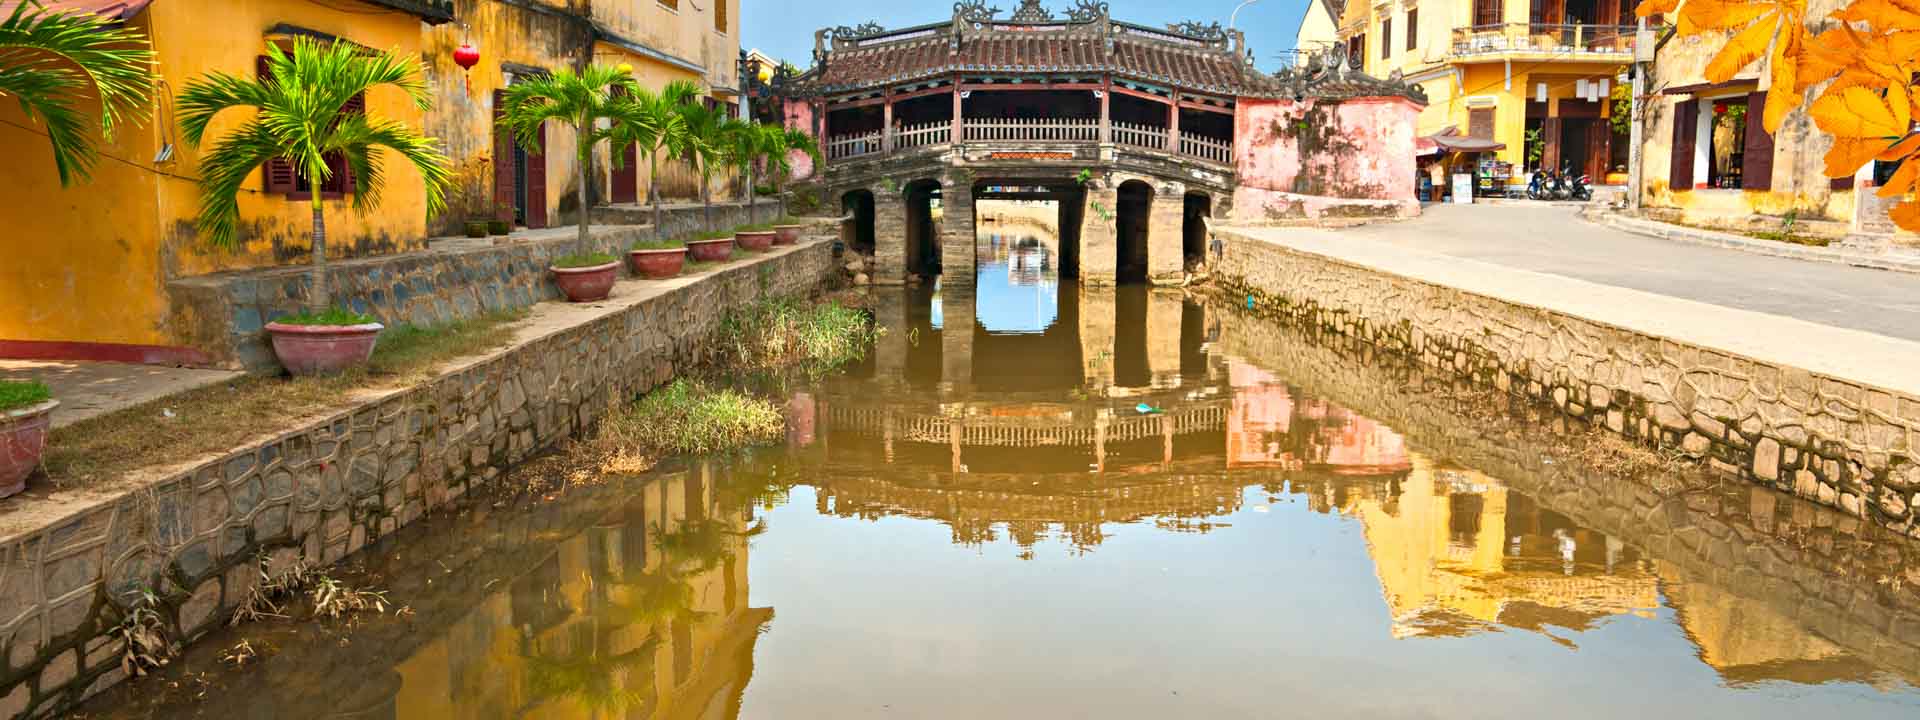 Hoi An Ancient Town – Free & Easy 4 days